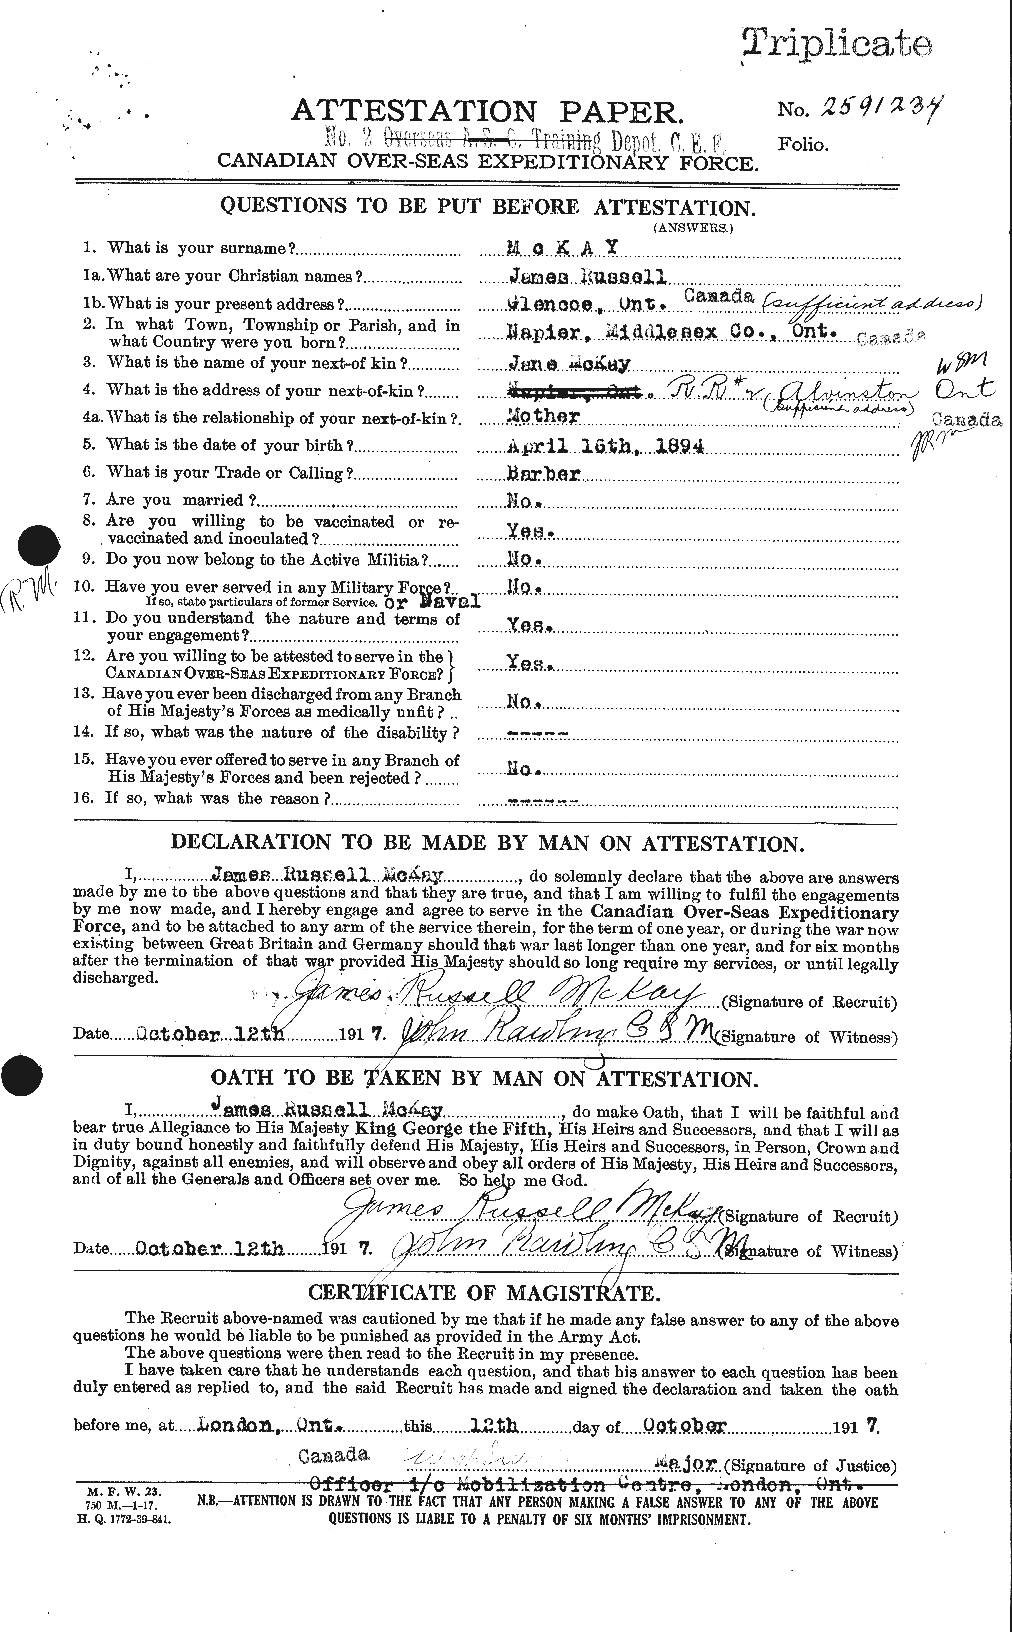 Personnel Records of the First World War - CEF 526941a